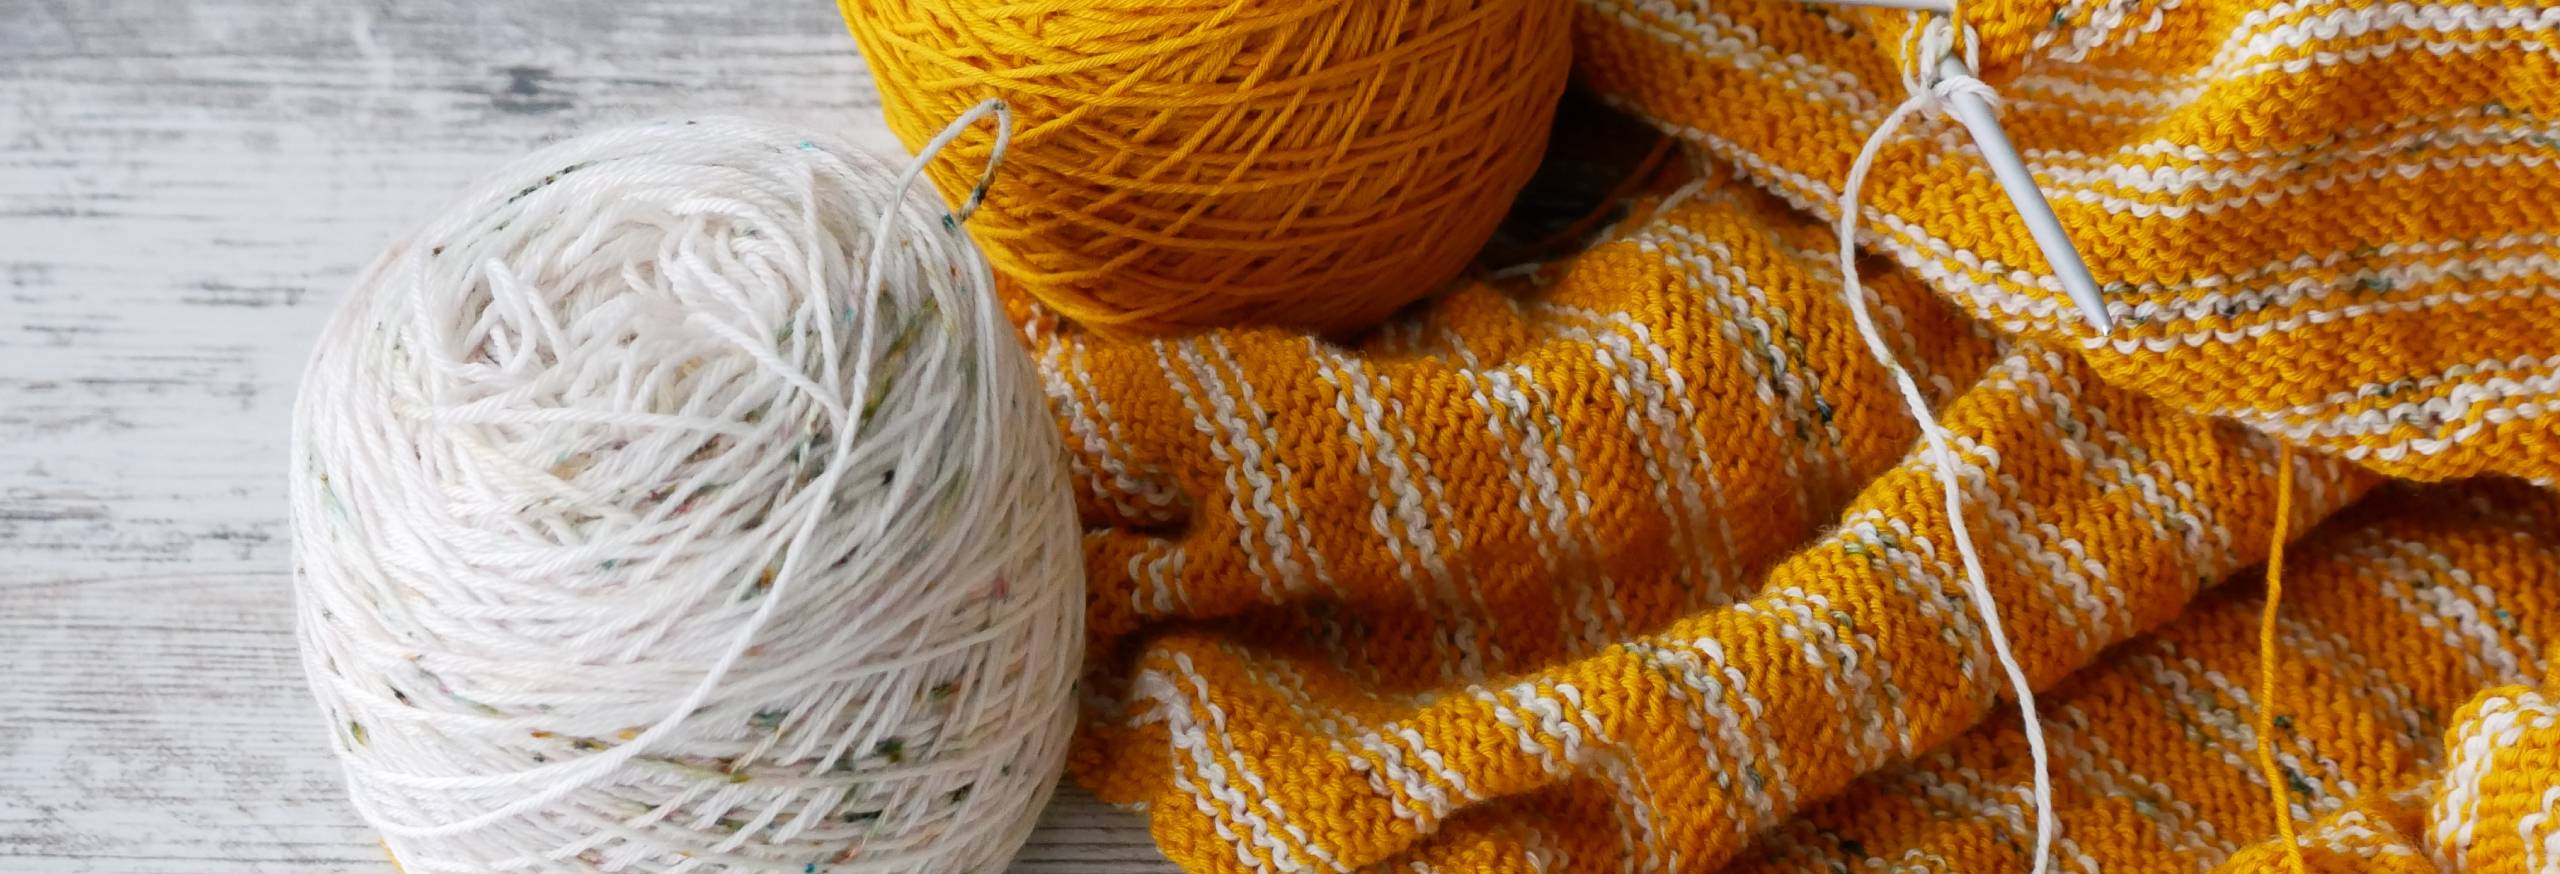 Golden Yellow and White Speckled yarn sits next to a striped knitting project